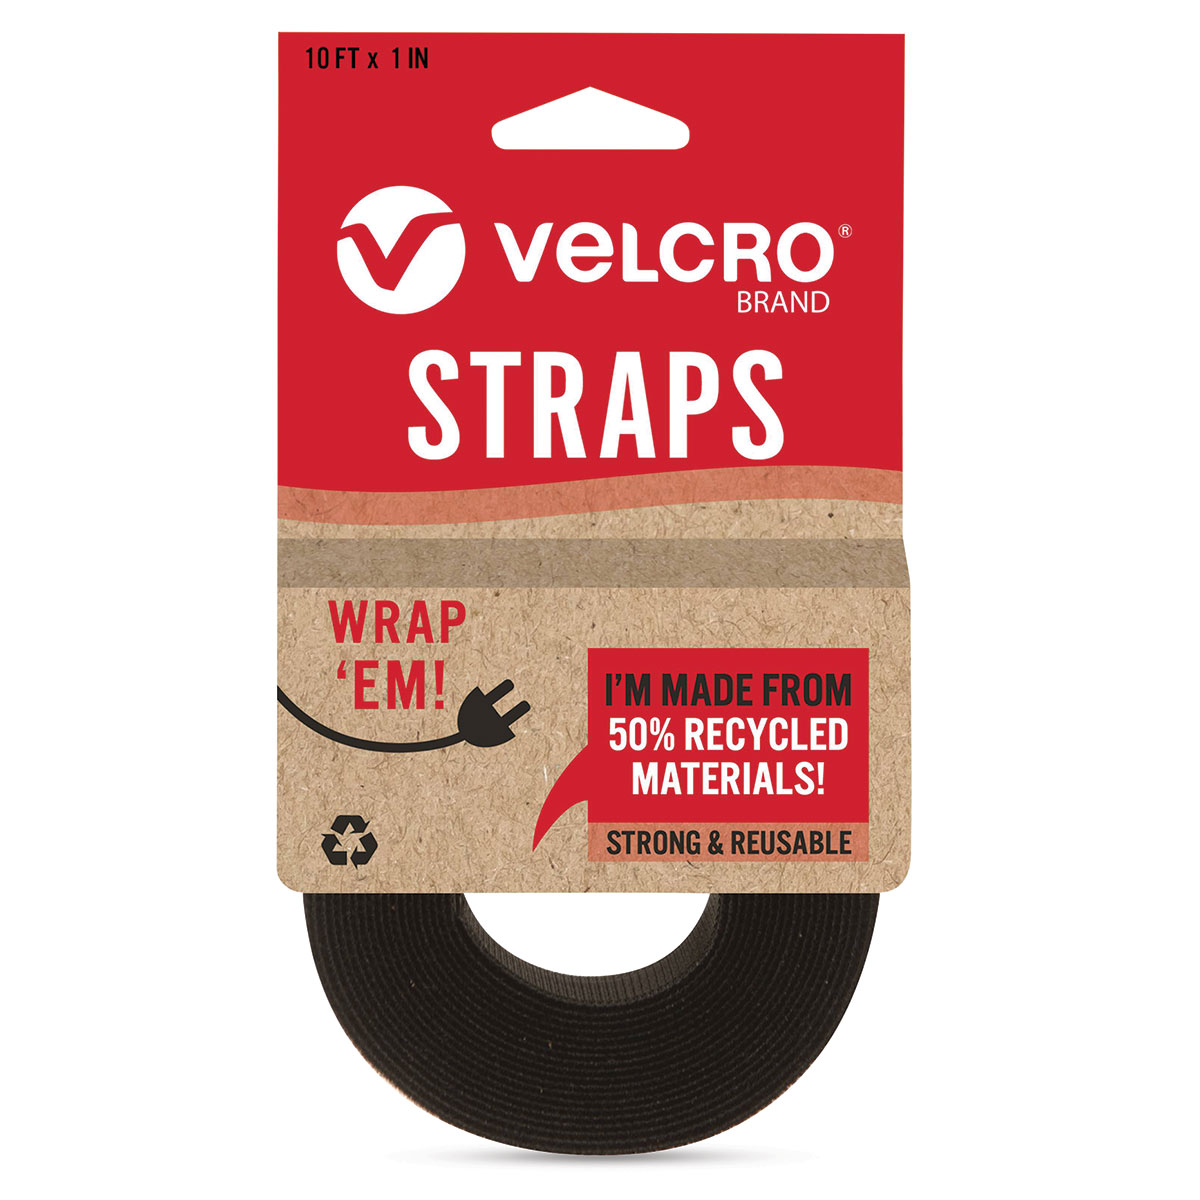 Velcro Brand Eco Collection Sew on Tape 36in x 3/4in. Black